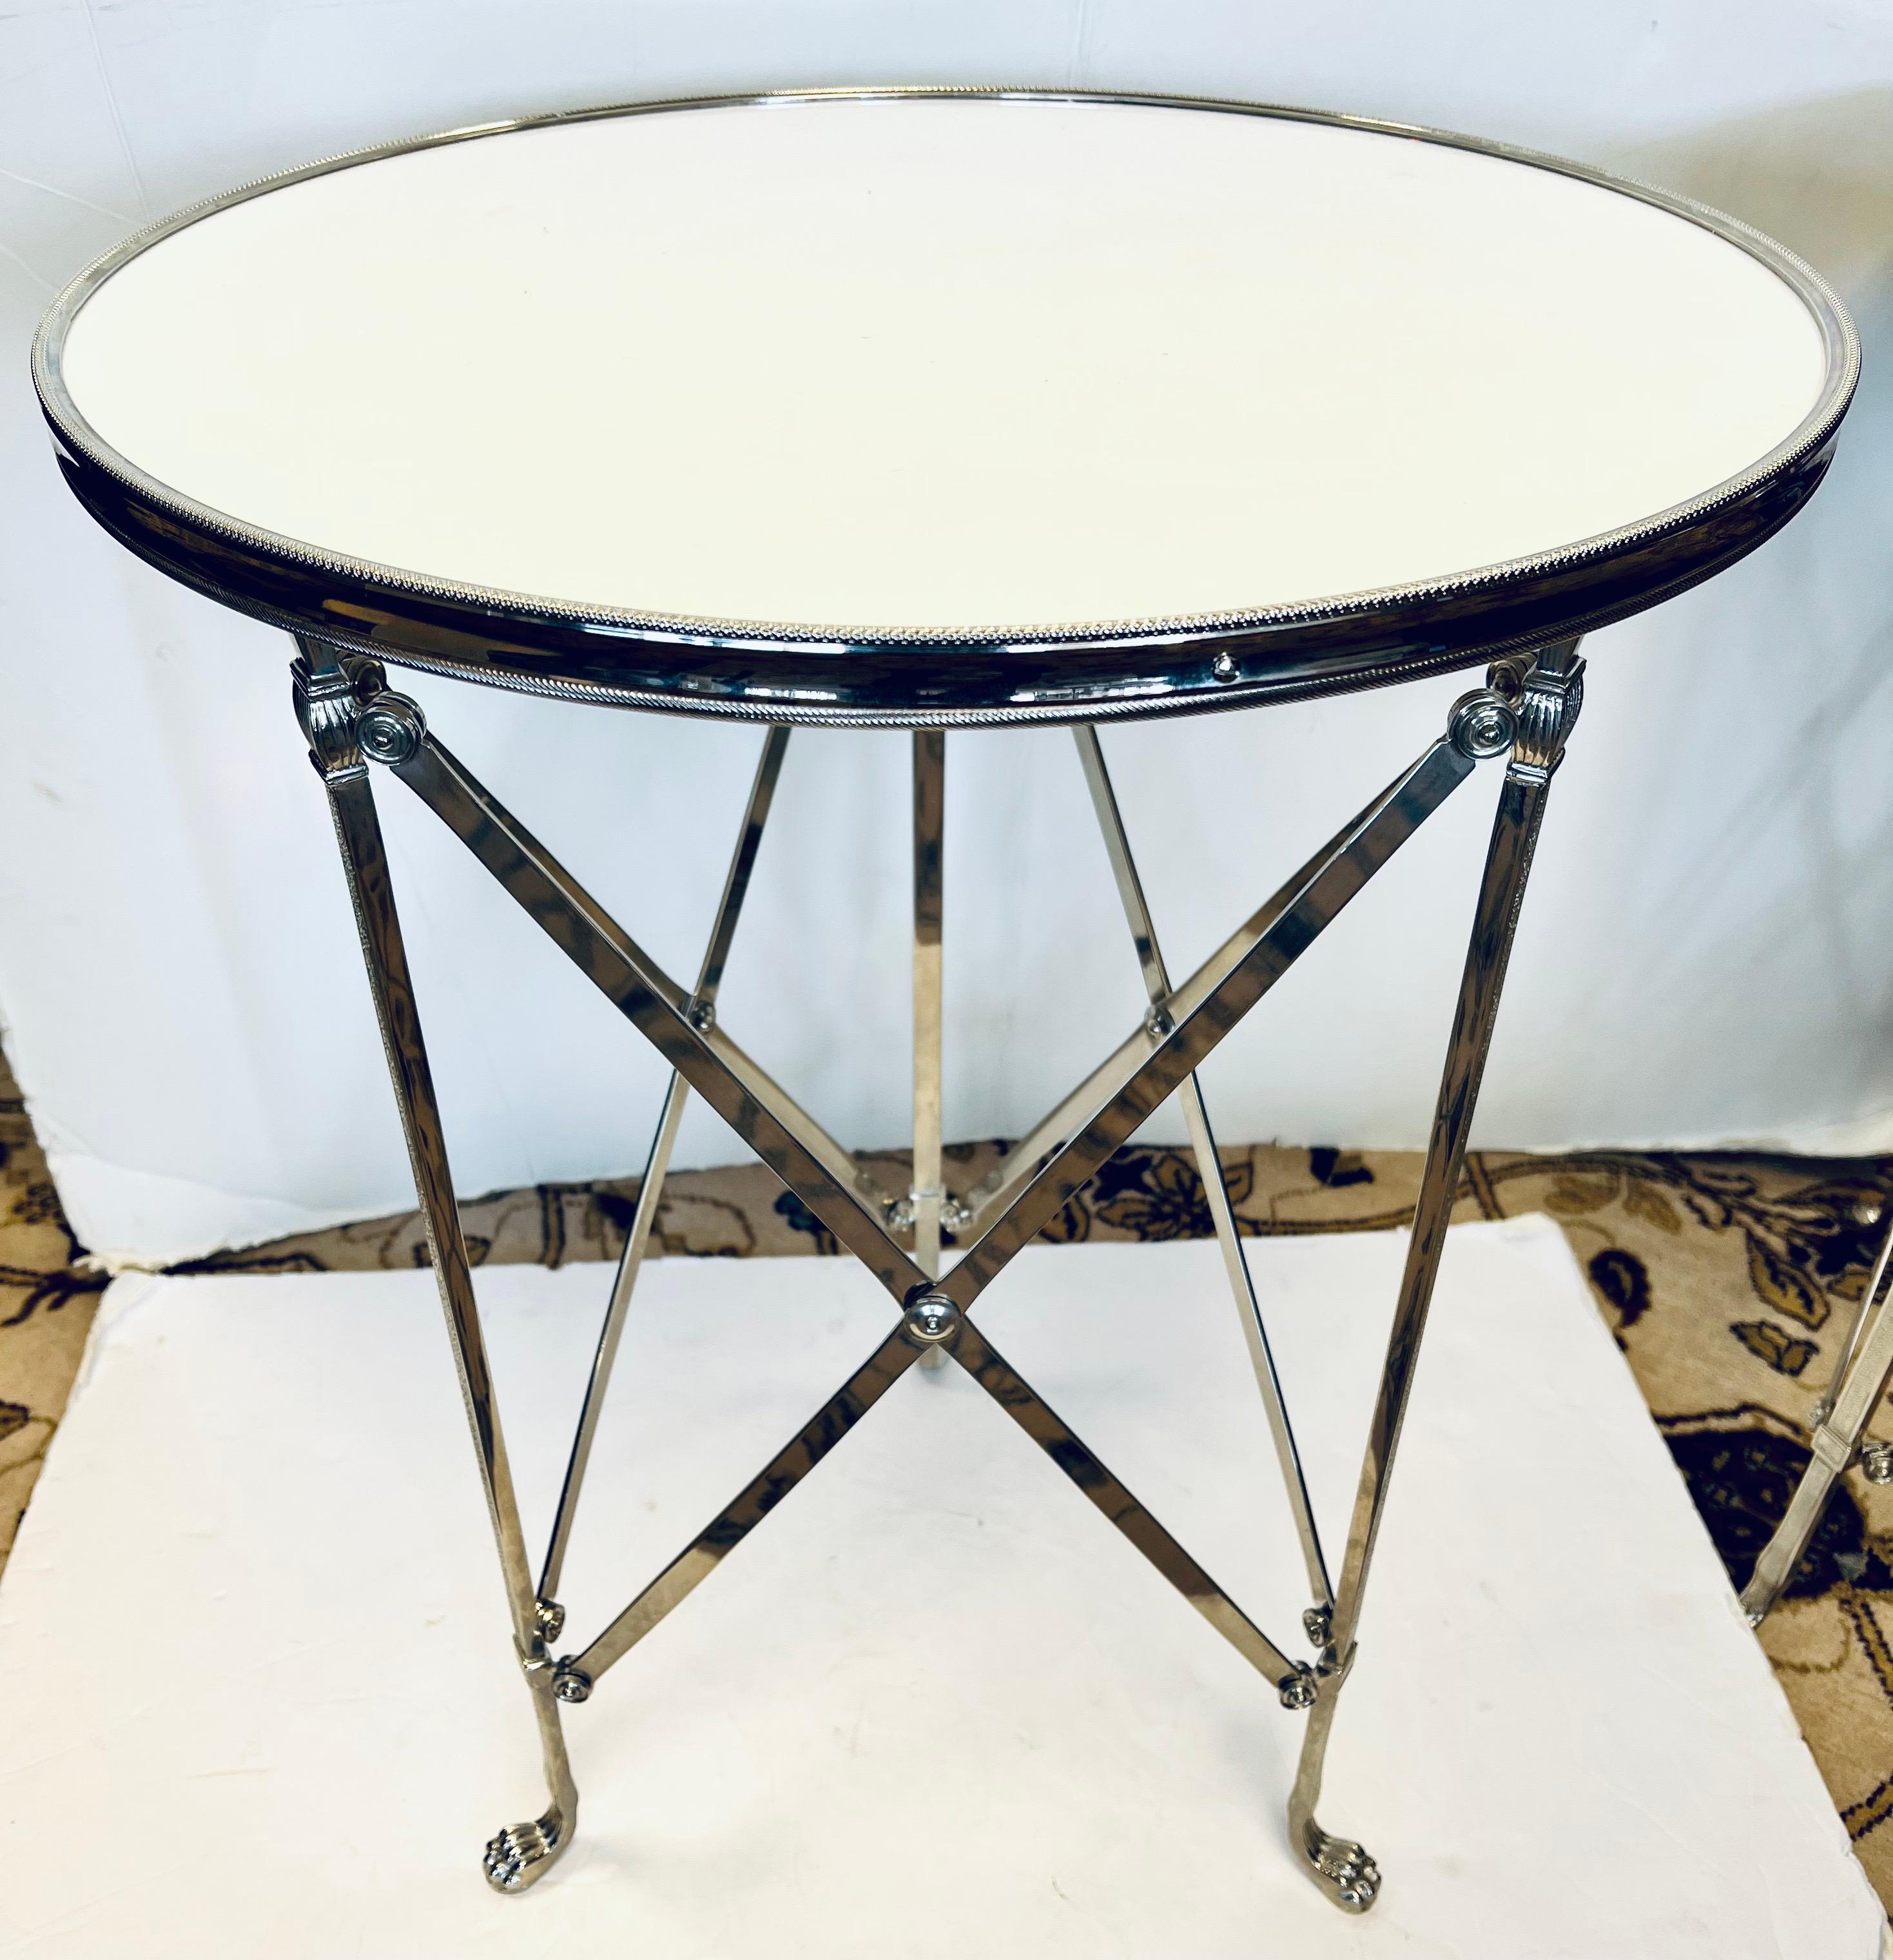 Pair of French style gueridon round side tables with inset white marble tops on chrome x-bases terminating in lion law feet.